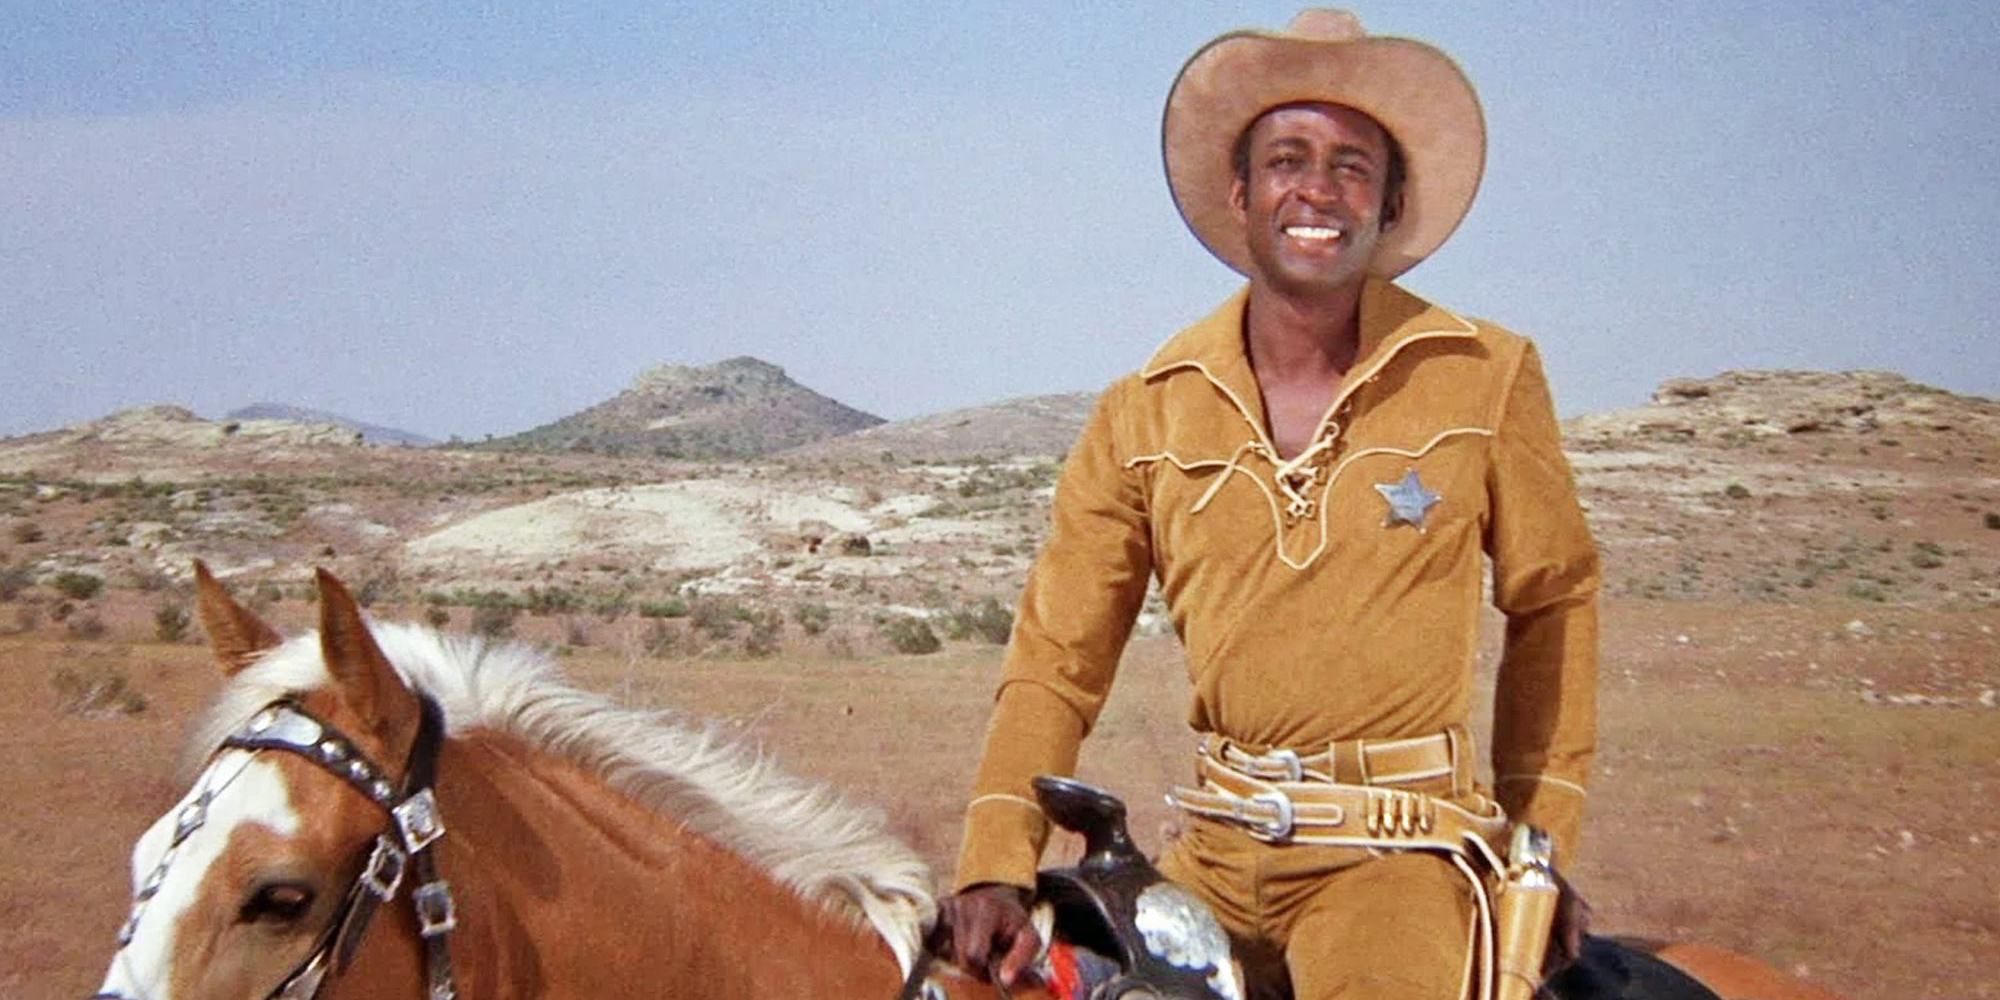 Cleavon little riding his horse in his sherrif's outifit and smiling in Blazing Saddles